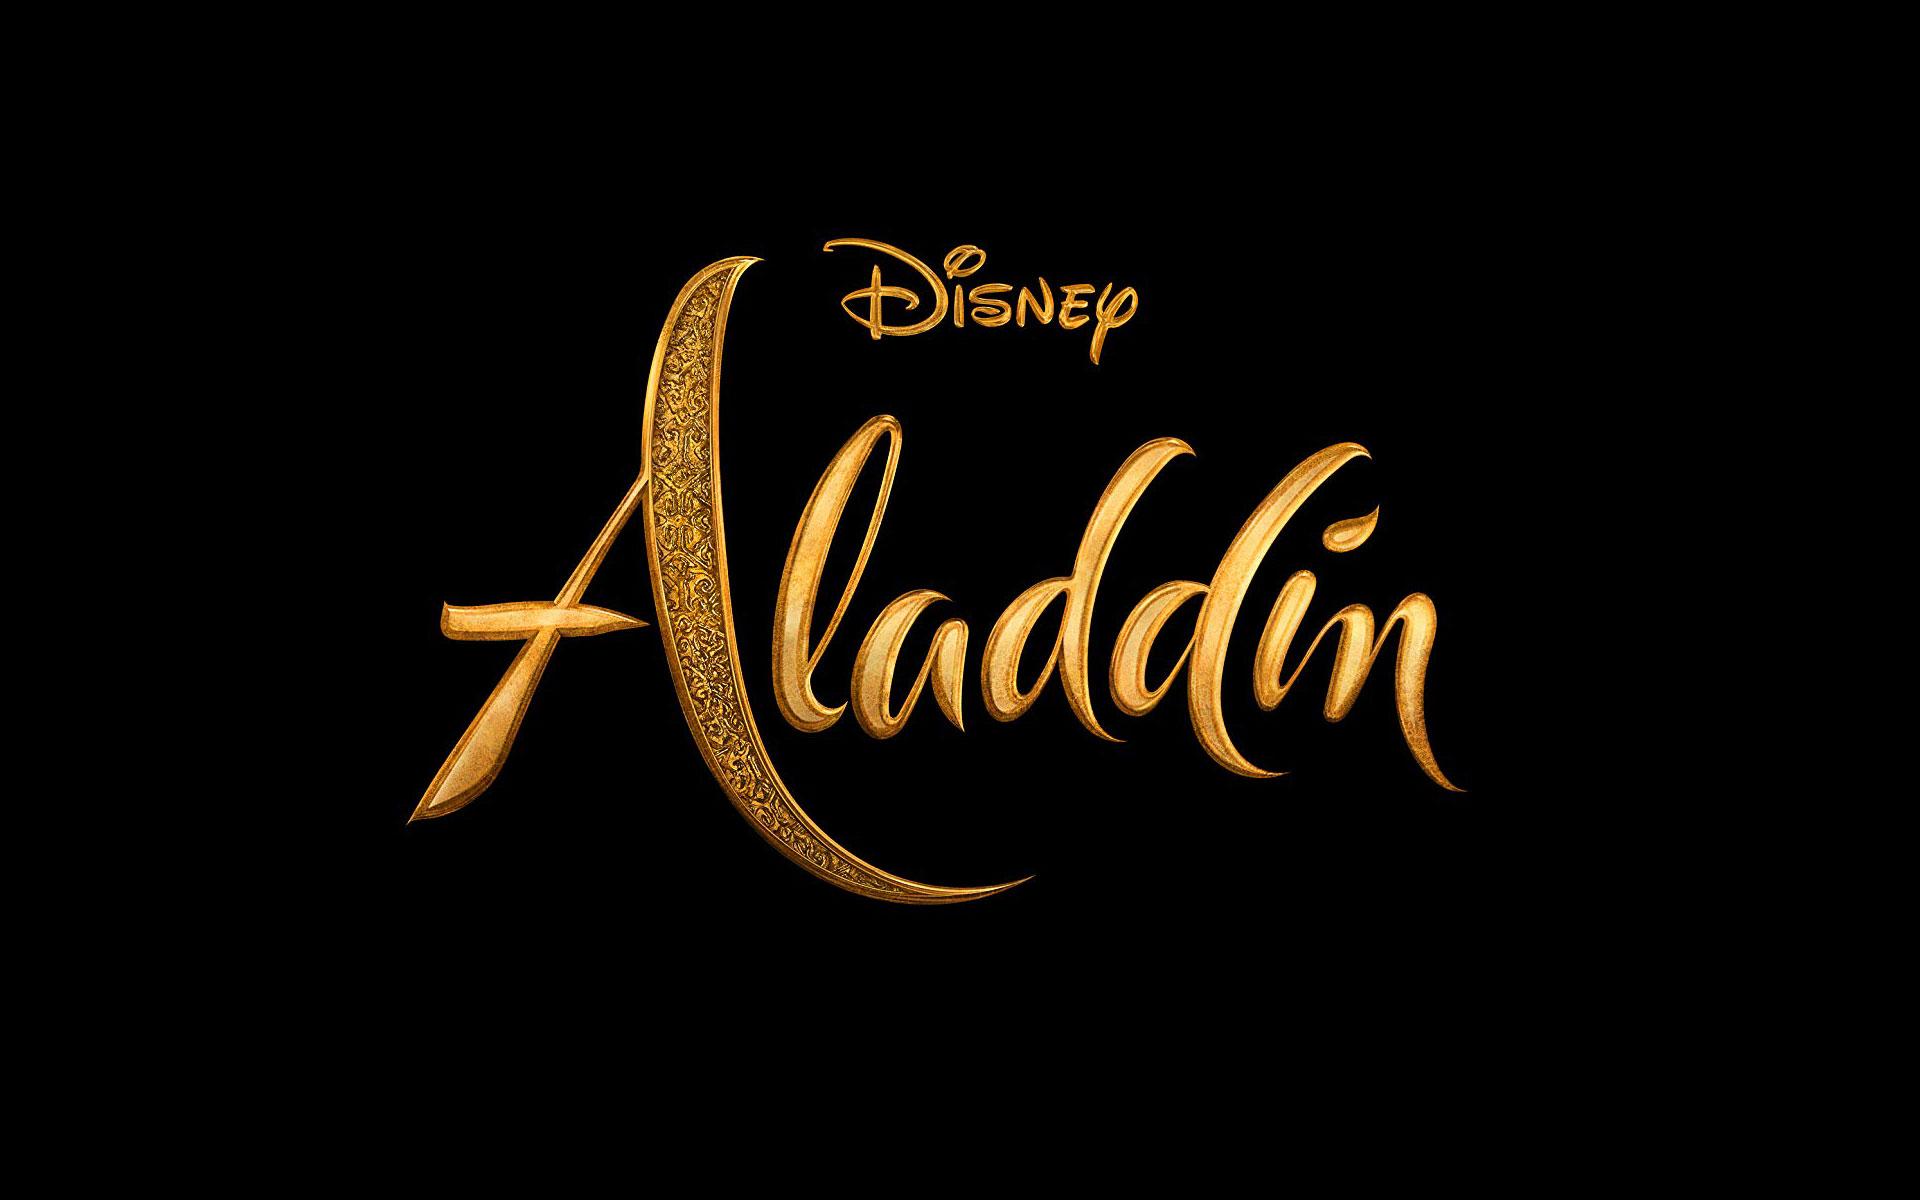 Aladdin Movie 2019 Wallpaper HD, Cast, Release Date, Official & Posters